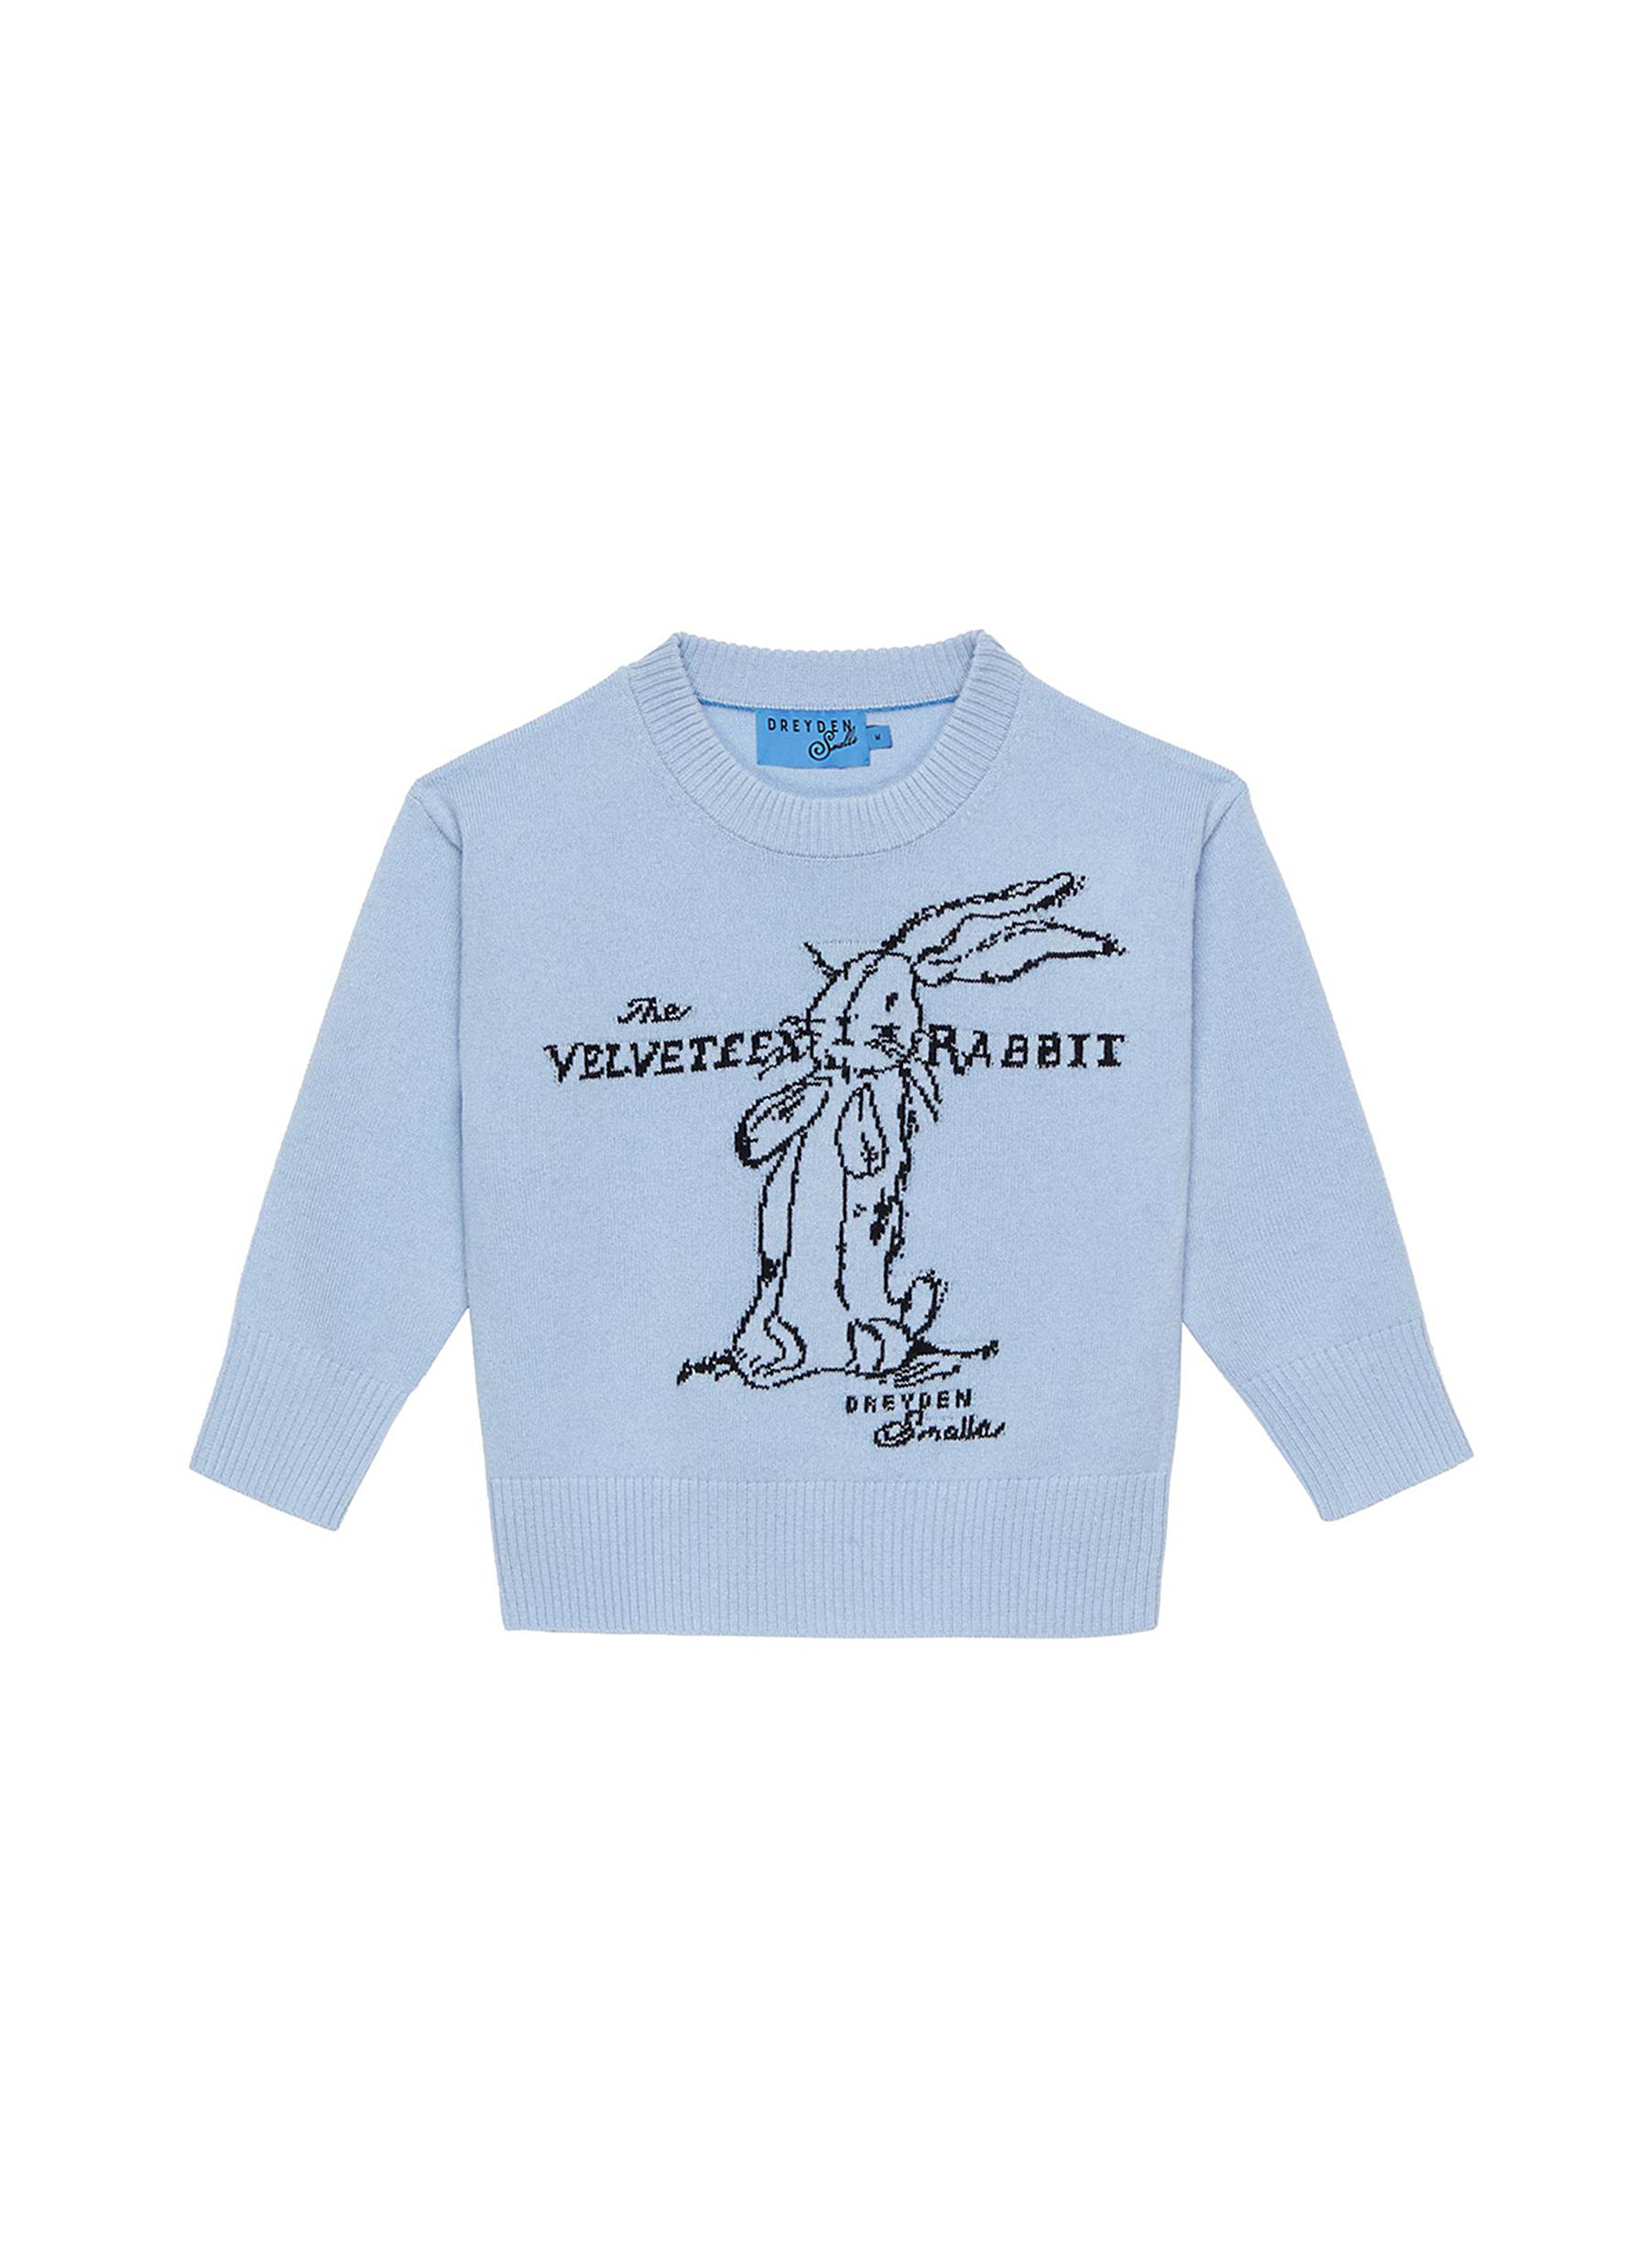 'The Velveteen Rabbit' Graphic Cashmere Knit Kids Sweater